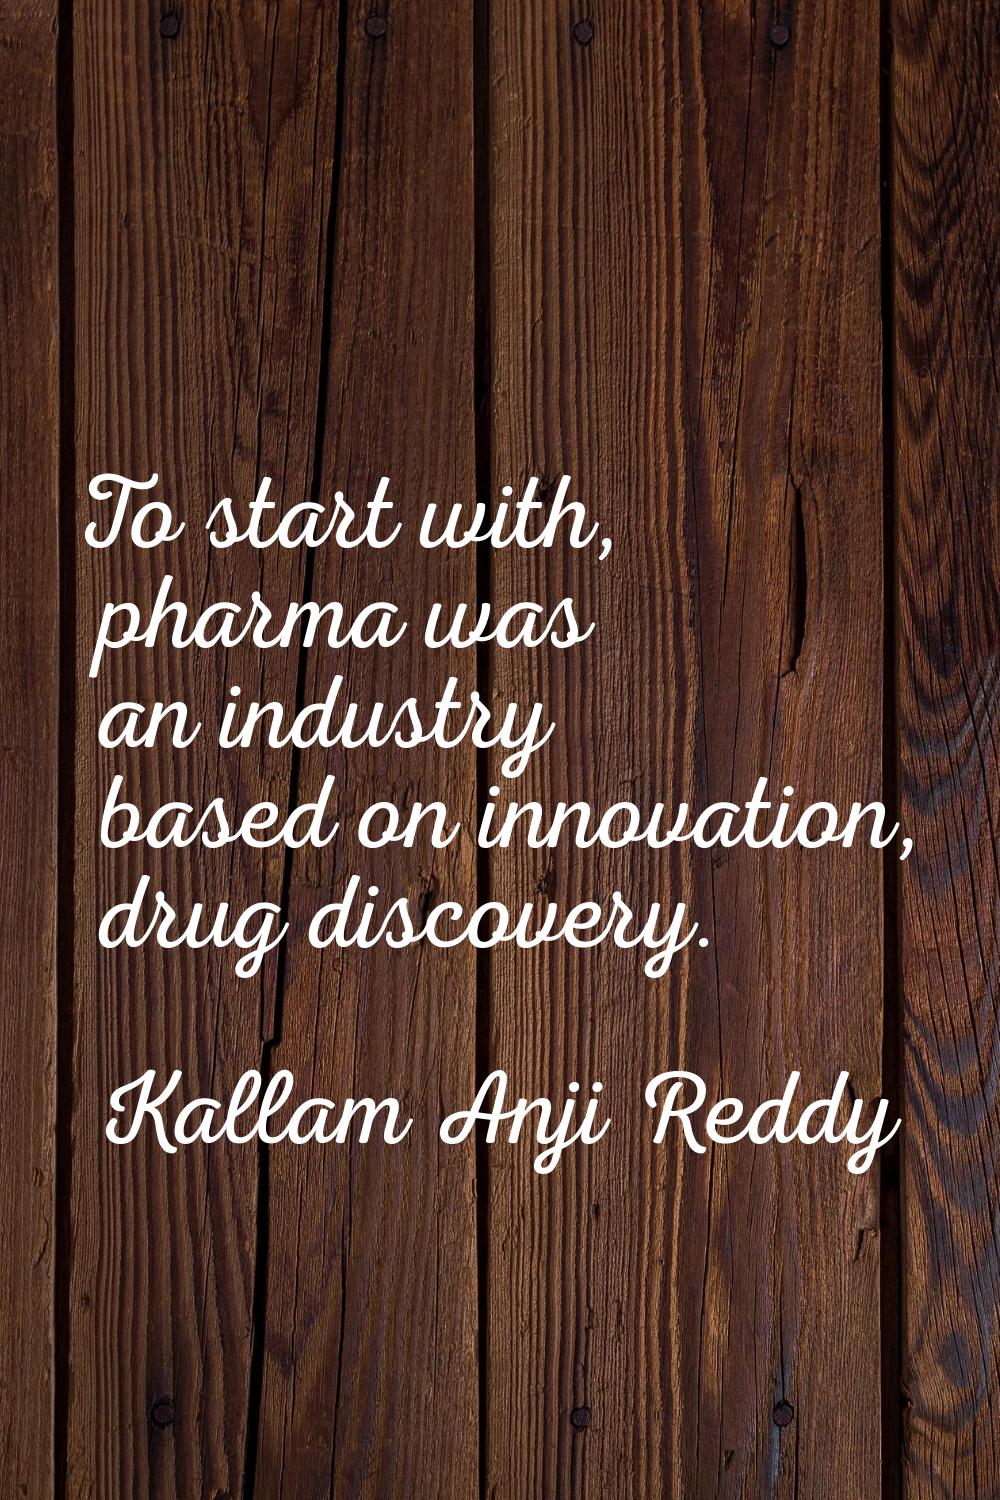 To start with, pharma was an industry based on innovation, drug discovery.